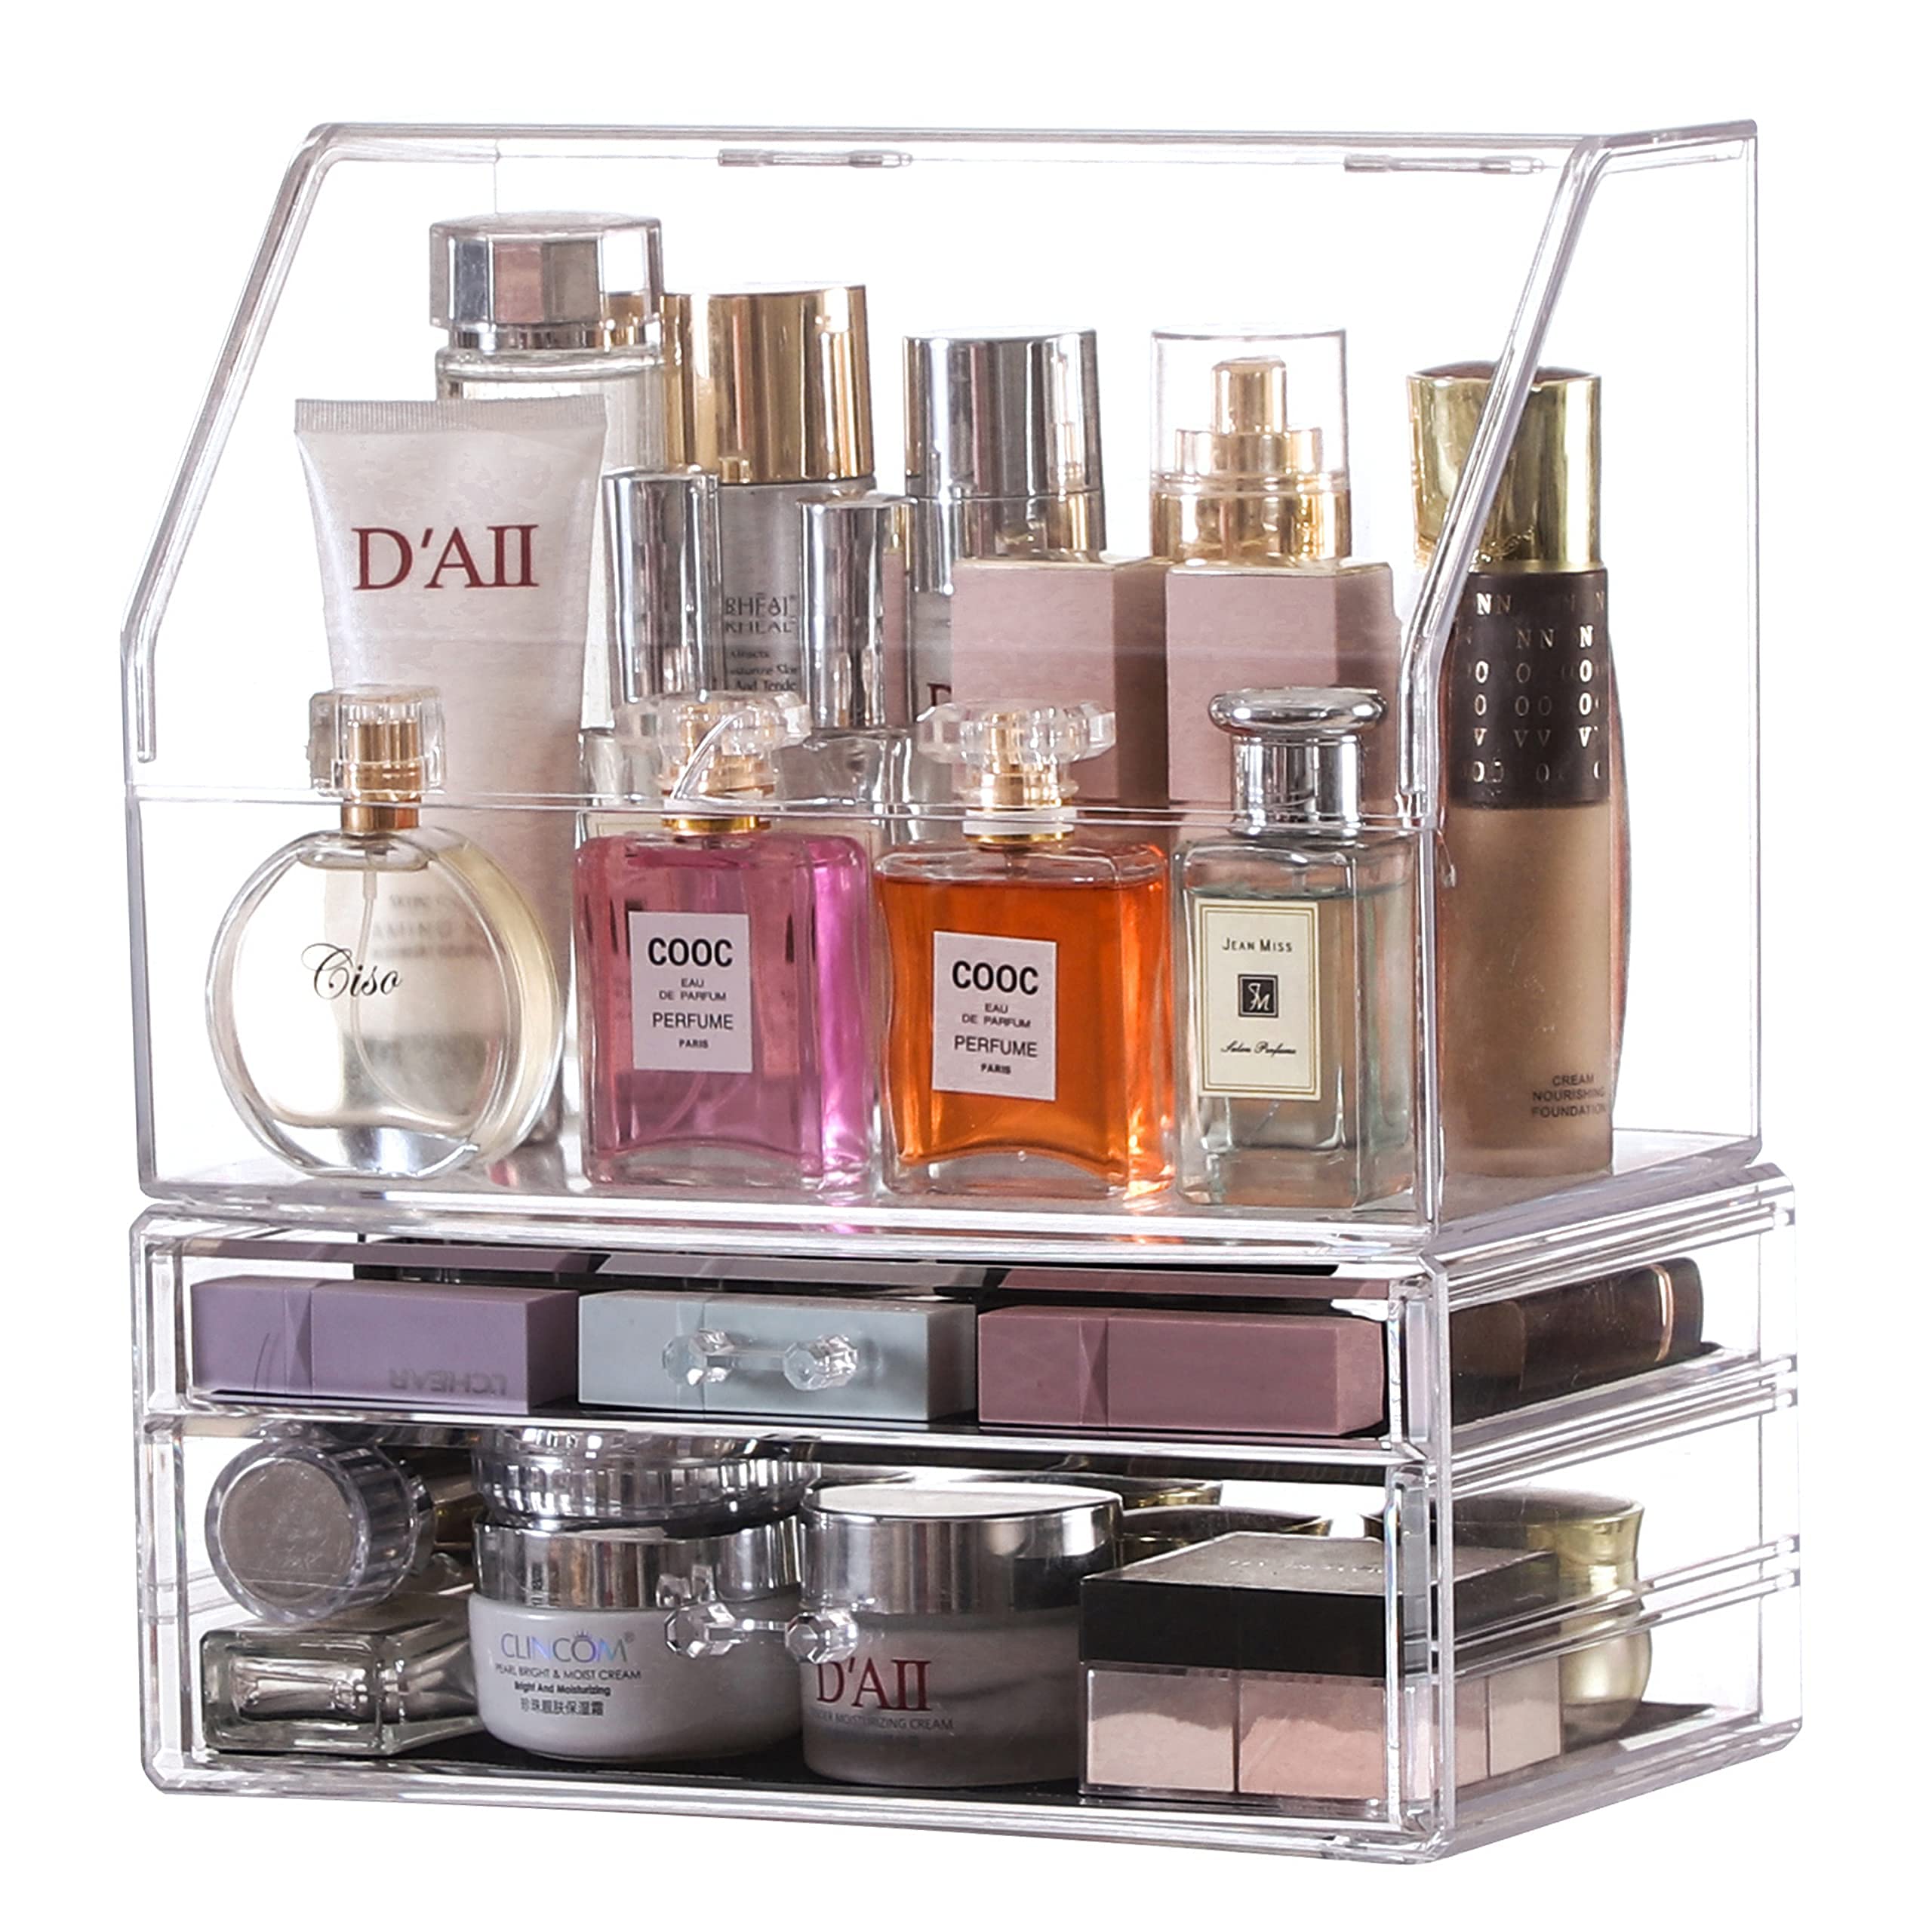 Cq acrylic Cosmetic Display Cases with LId Dustproof Waterproof for Bathroom Countertop Stackable Clear Makeup Organizer and Storage with 2 Drawers,Set of 2